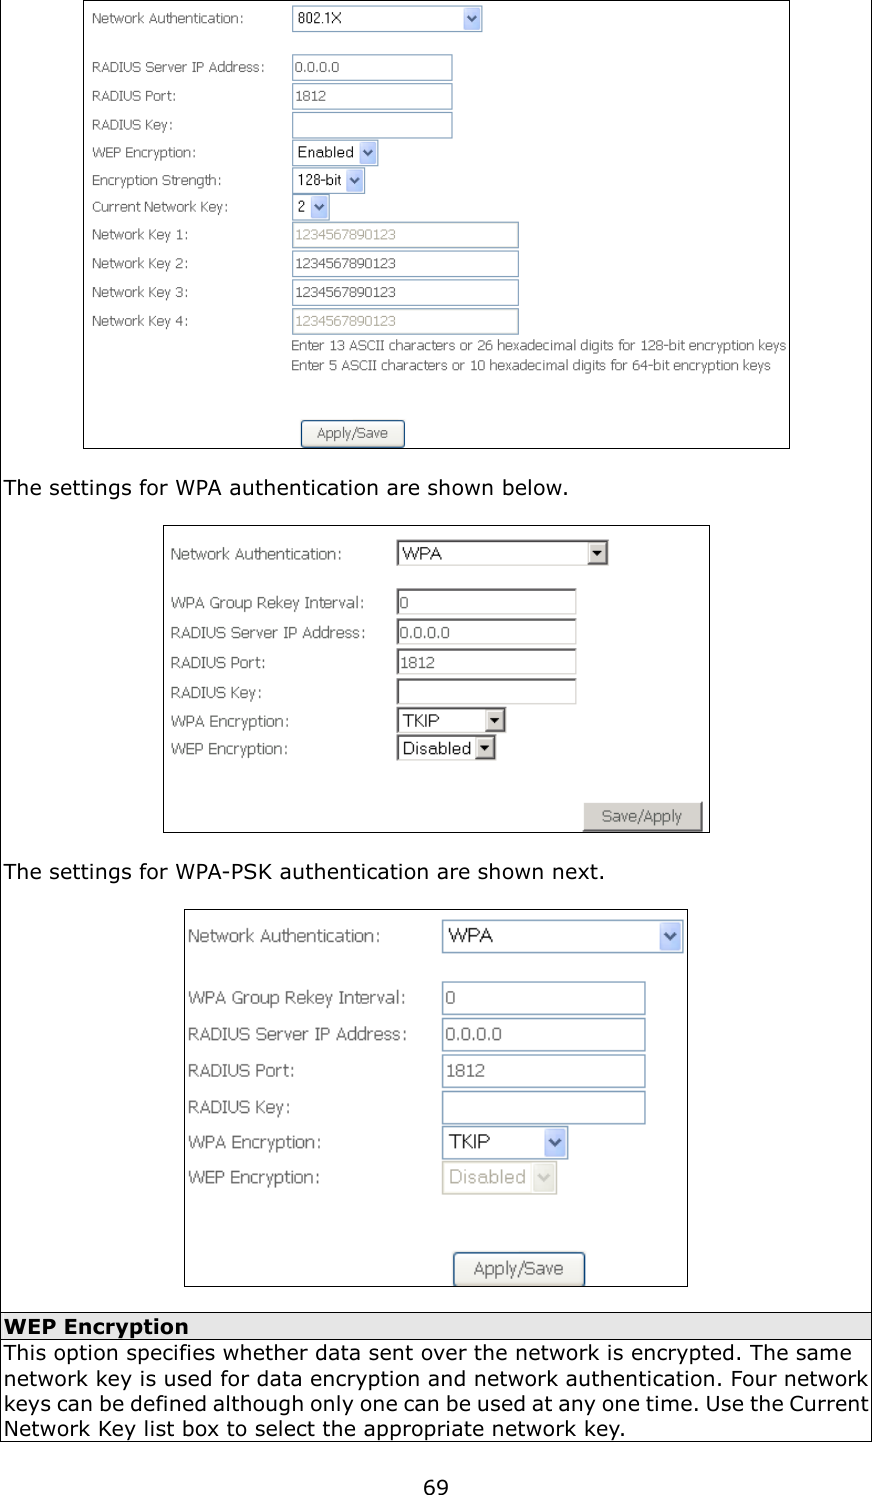   69   The settings for WPA authentication are shown below.    The settings for WPA-PSK authentication are shown next.    WEP Encryption This option specifies whether data sent over the network is encrypted. The same network key is used for data encryption and network authentication. Four network keys can be defined although only one can be used at any one time. Use the Current Network Key list box to select the appropriate network key.   